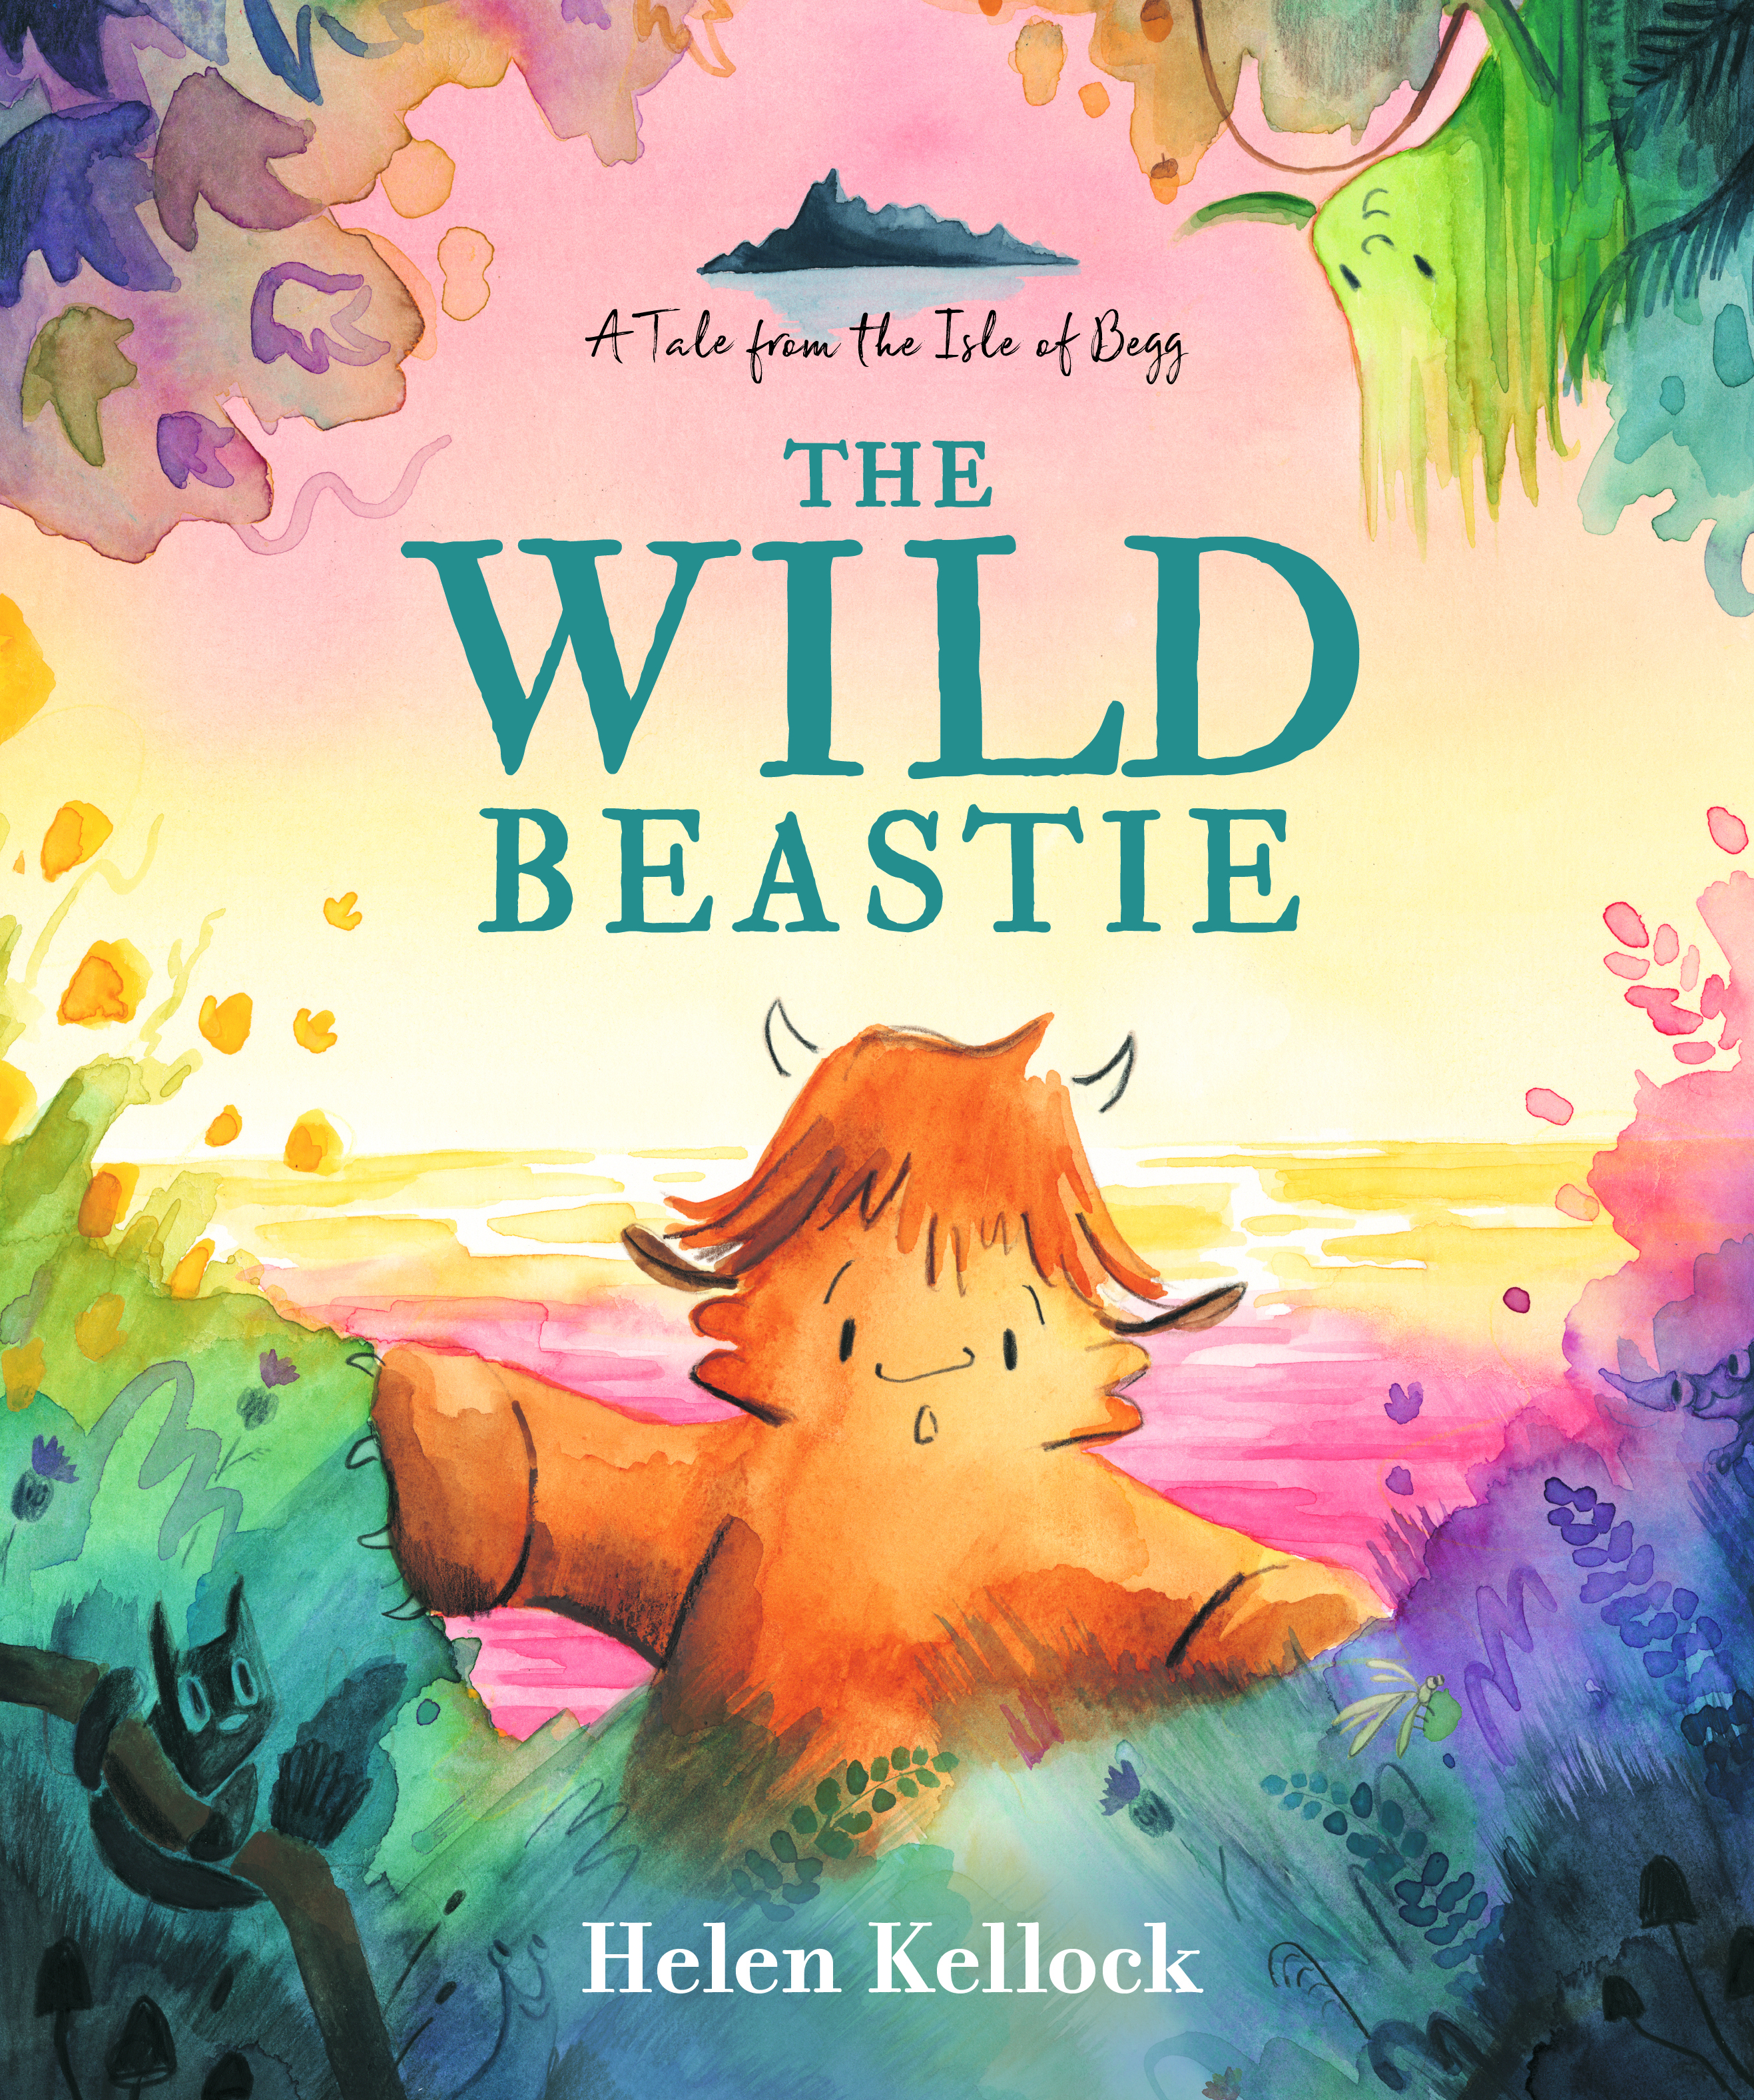 The-Wild-Beastie-A-Tale-from-the-Isle-of-Begg